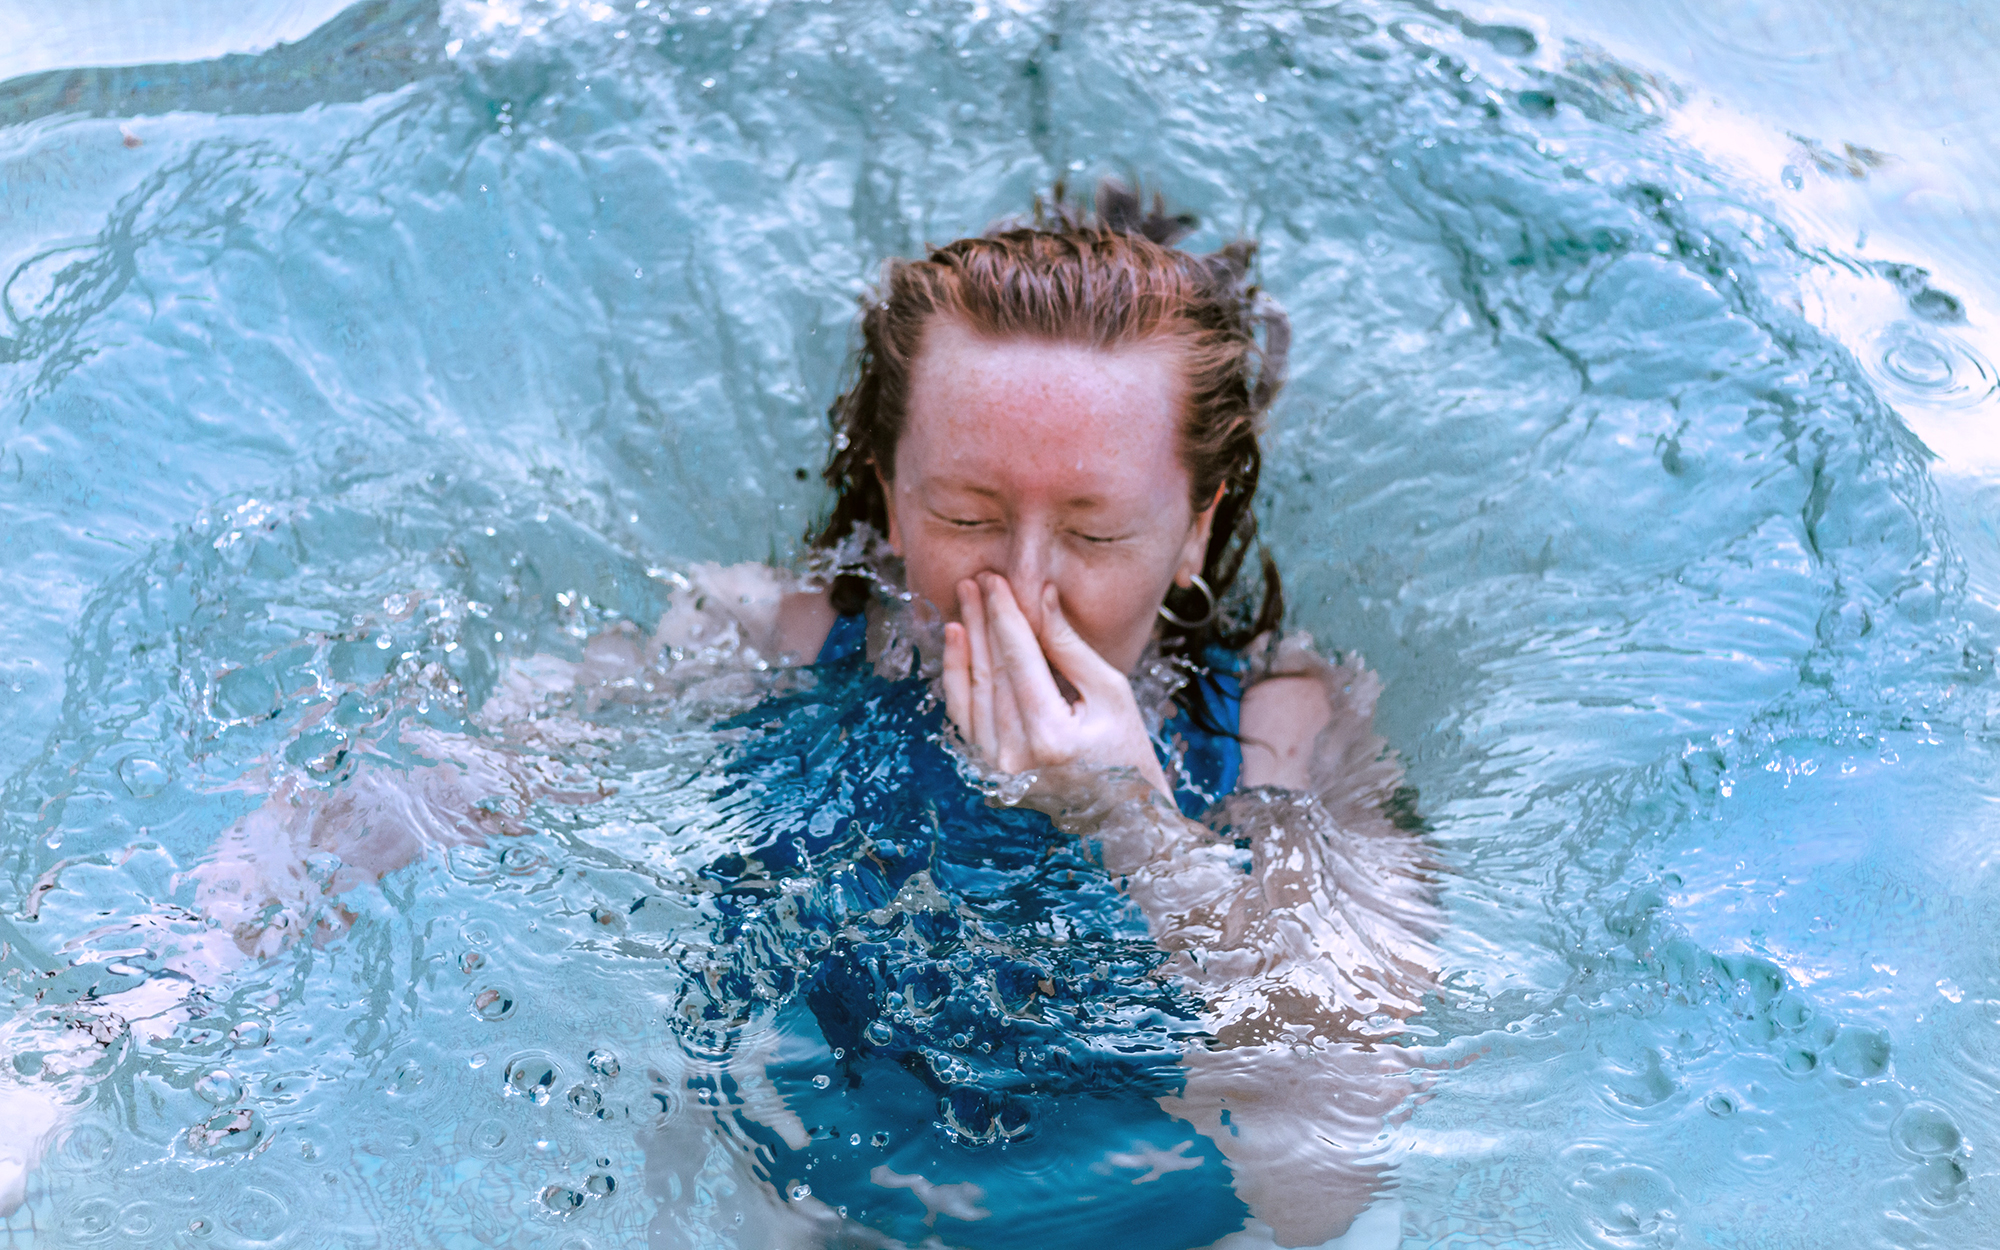 teen girl holding breath in water. Breath-holding games should b discouraged as they can lead to passing out in the water.